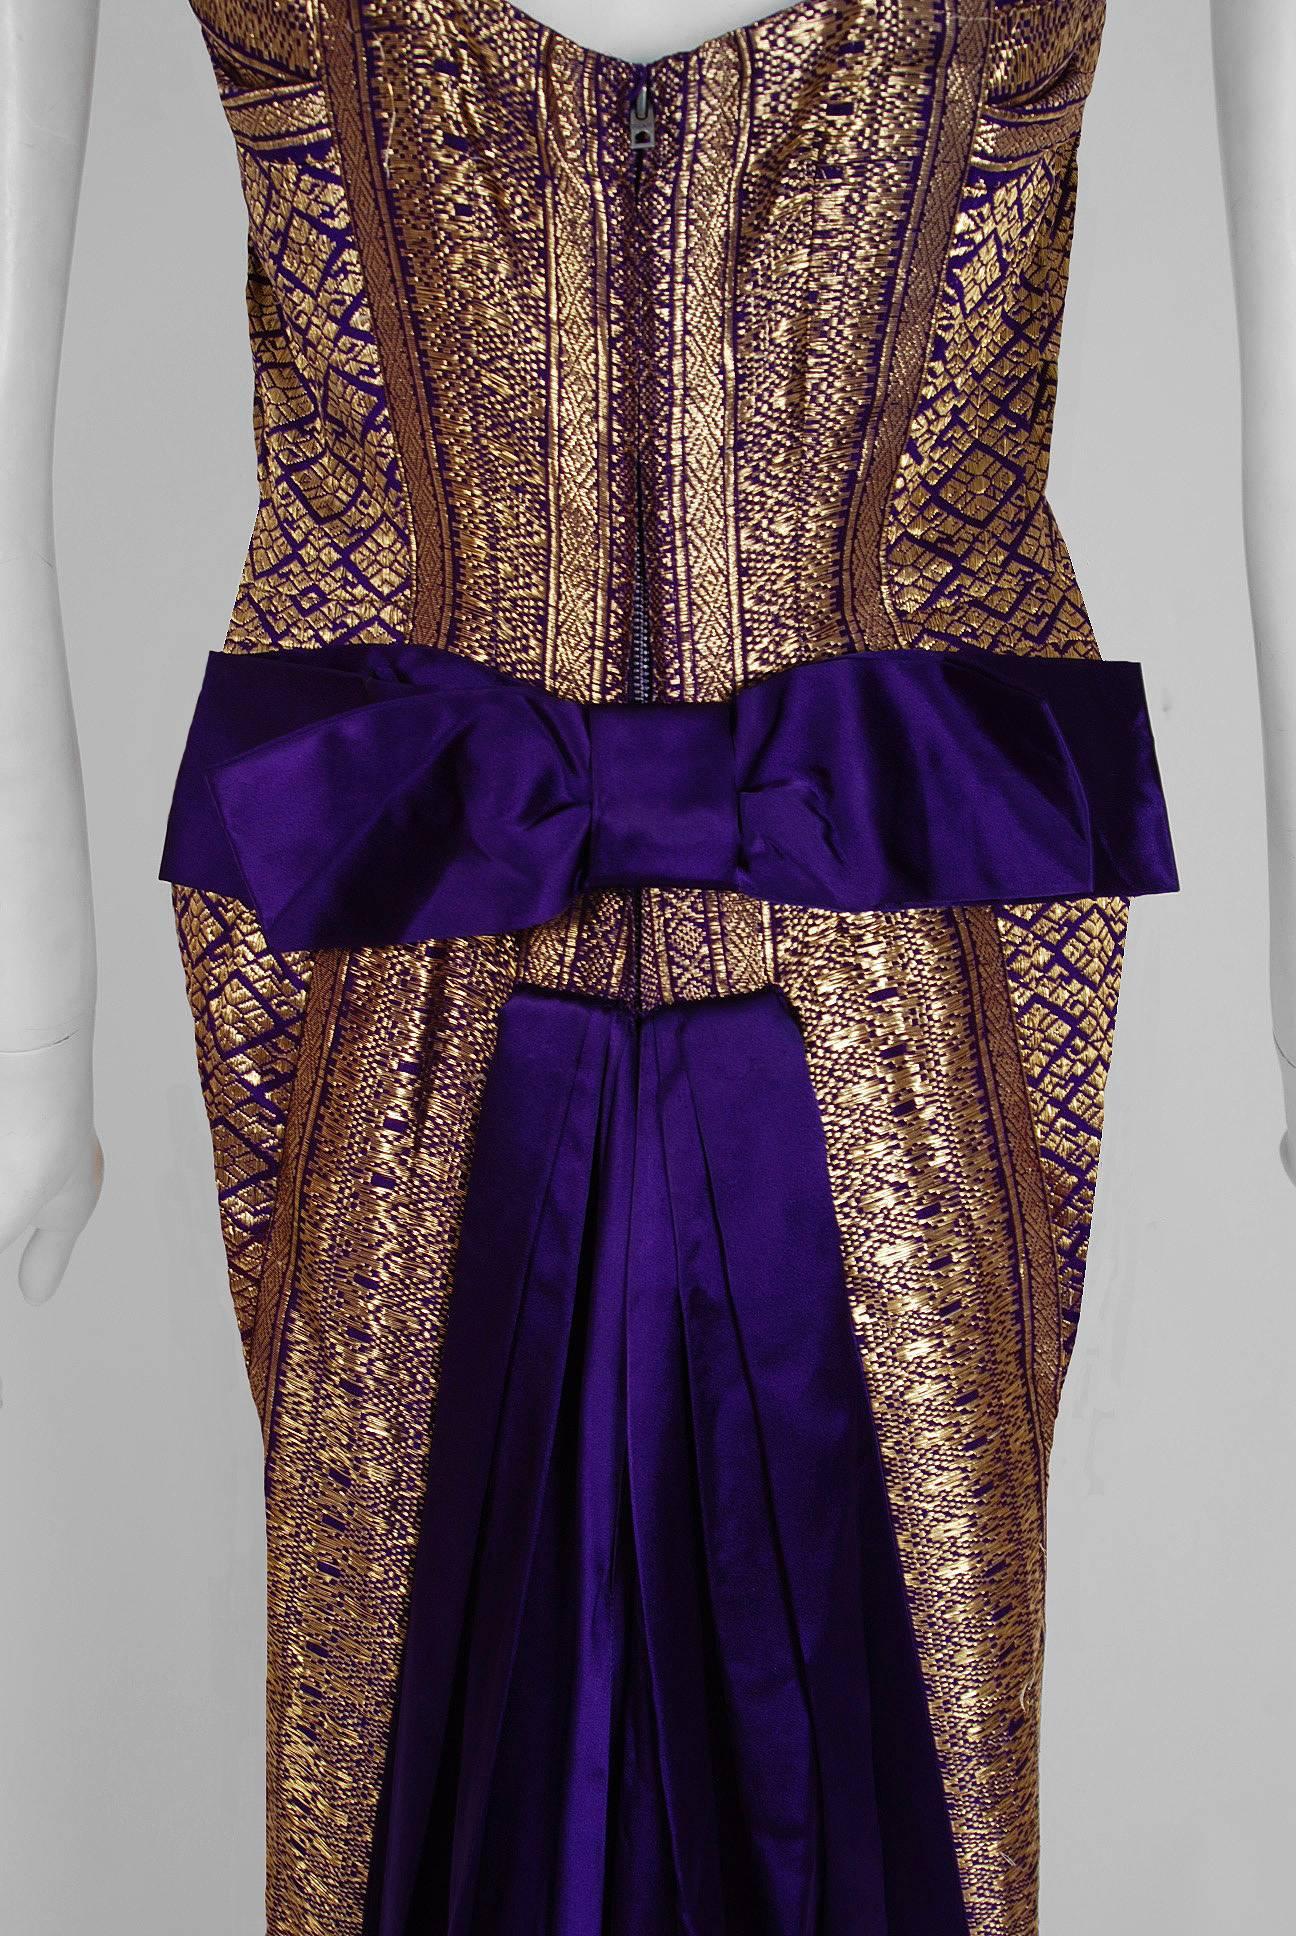 Women's 1955 Maggy Rouff Haute-Couture Metallic Gold & Purple Silk Satin Trained Gown